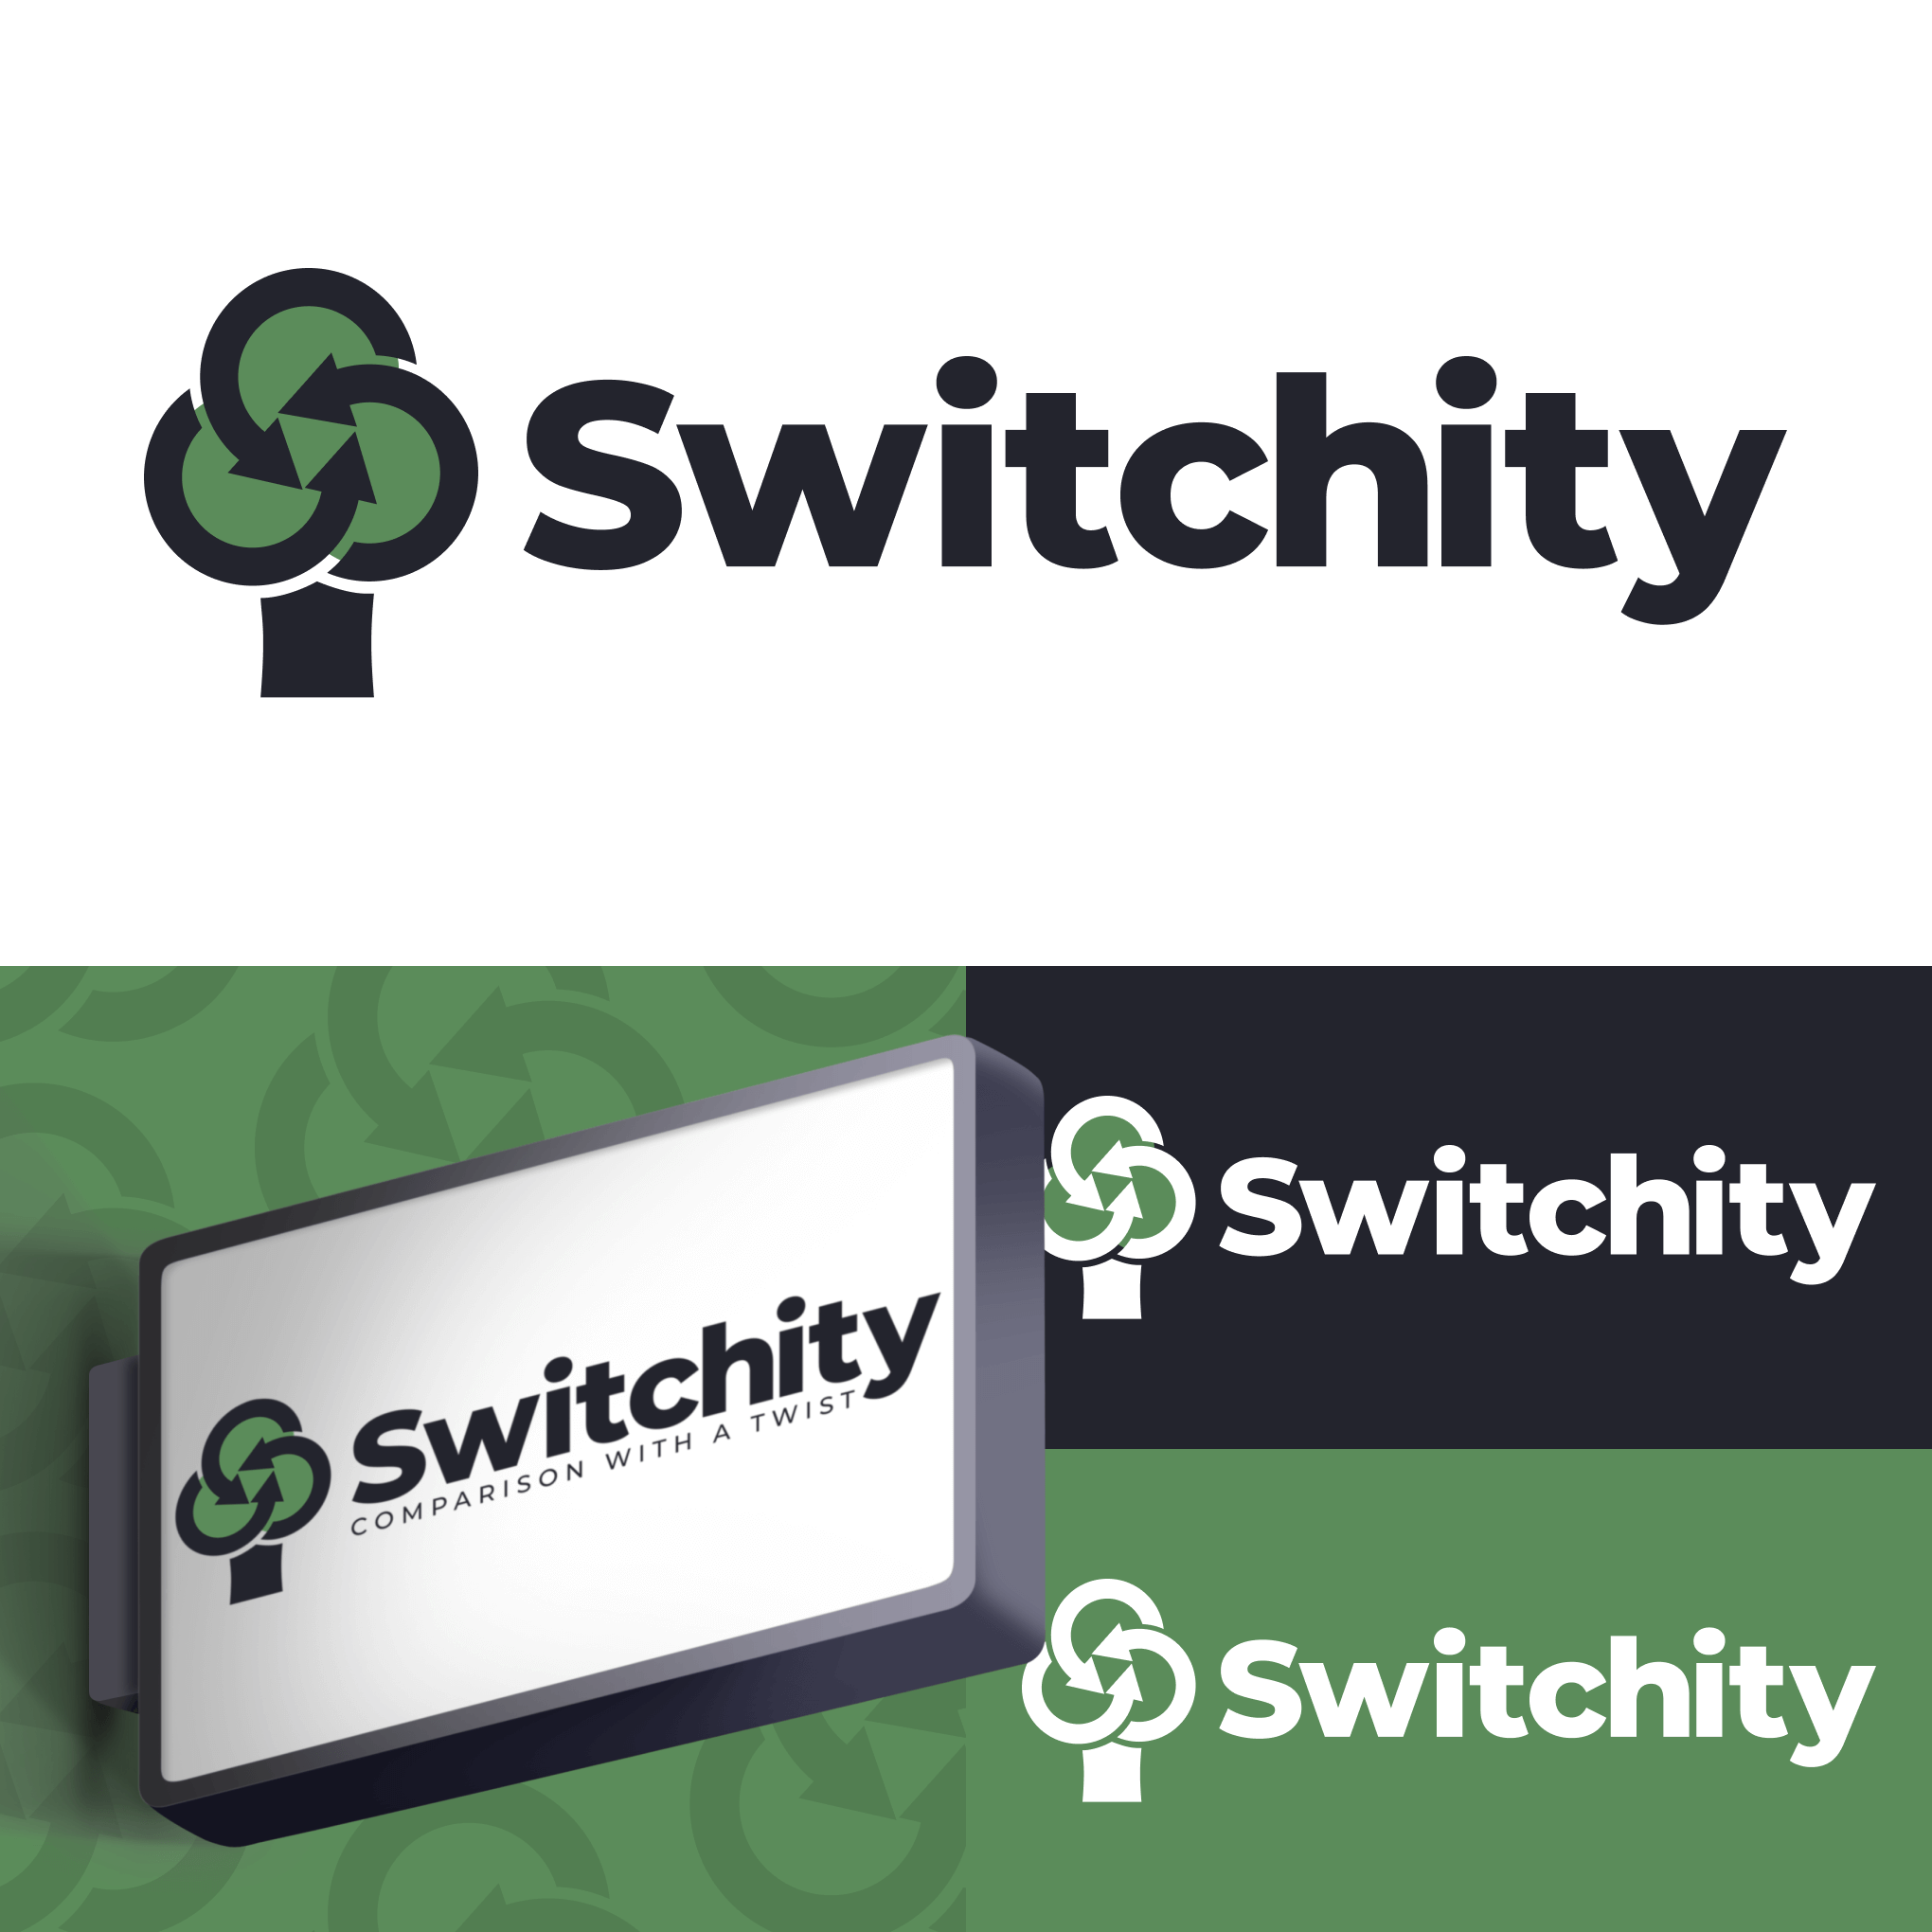 Switchity switch are a comparison website company. Their logo features a tree with arrows to represent switching suppliers. They plant a tree for every switch they do.